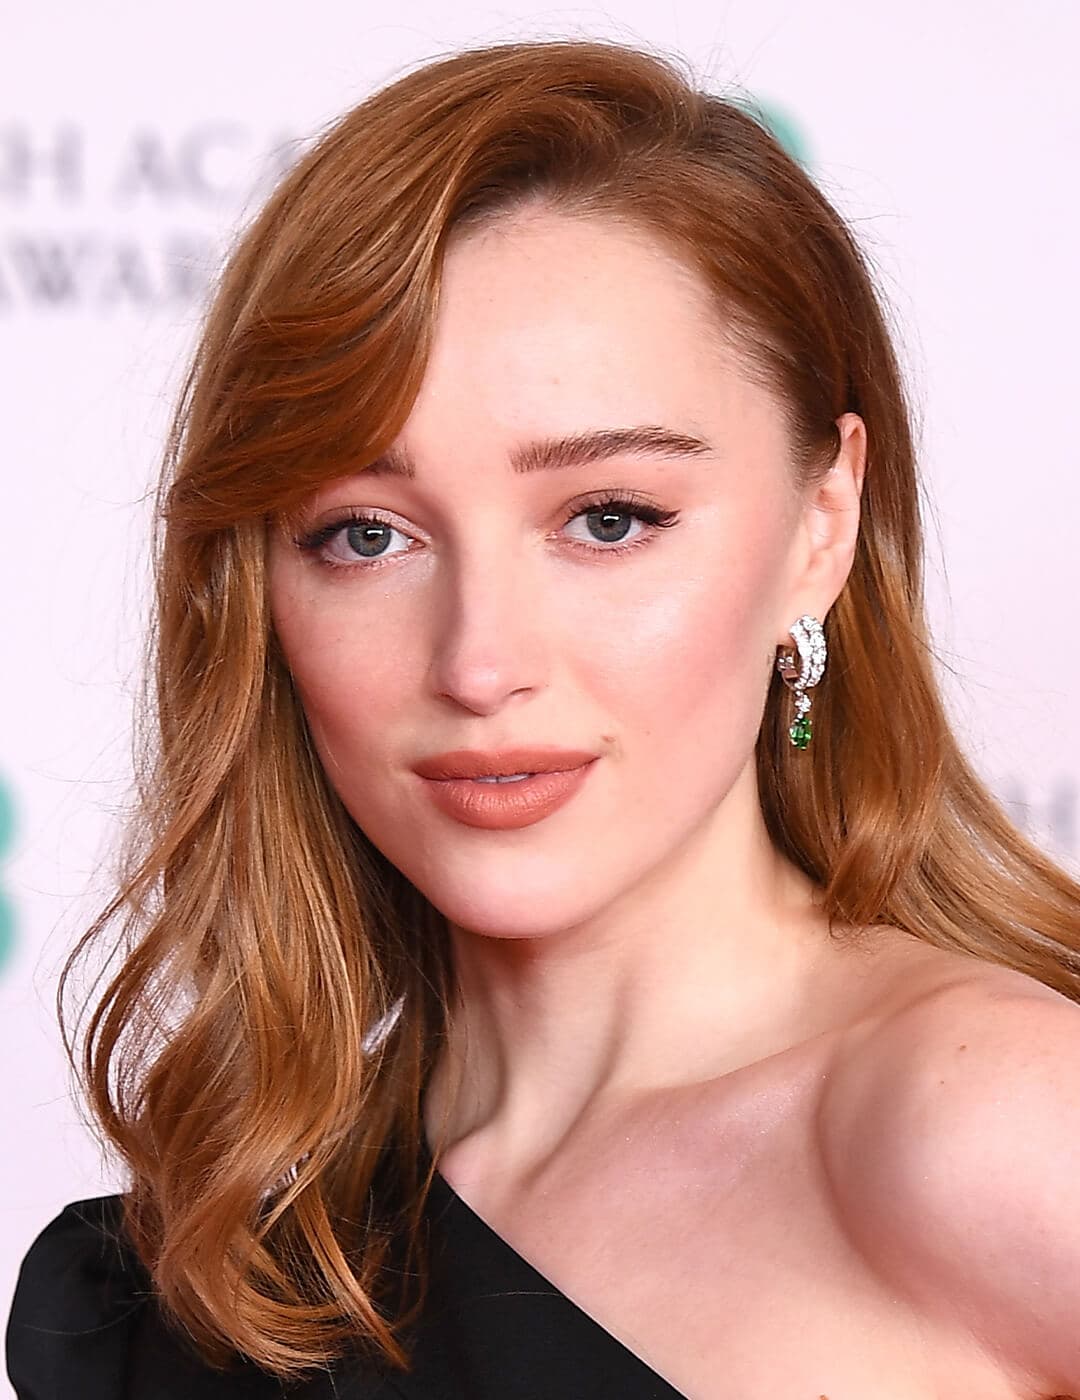 An image of Phoebe Dynevor showing her strawberry blonde hair